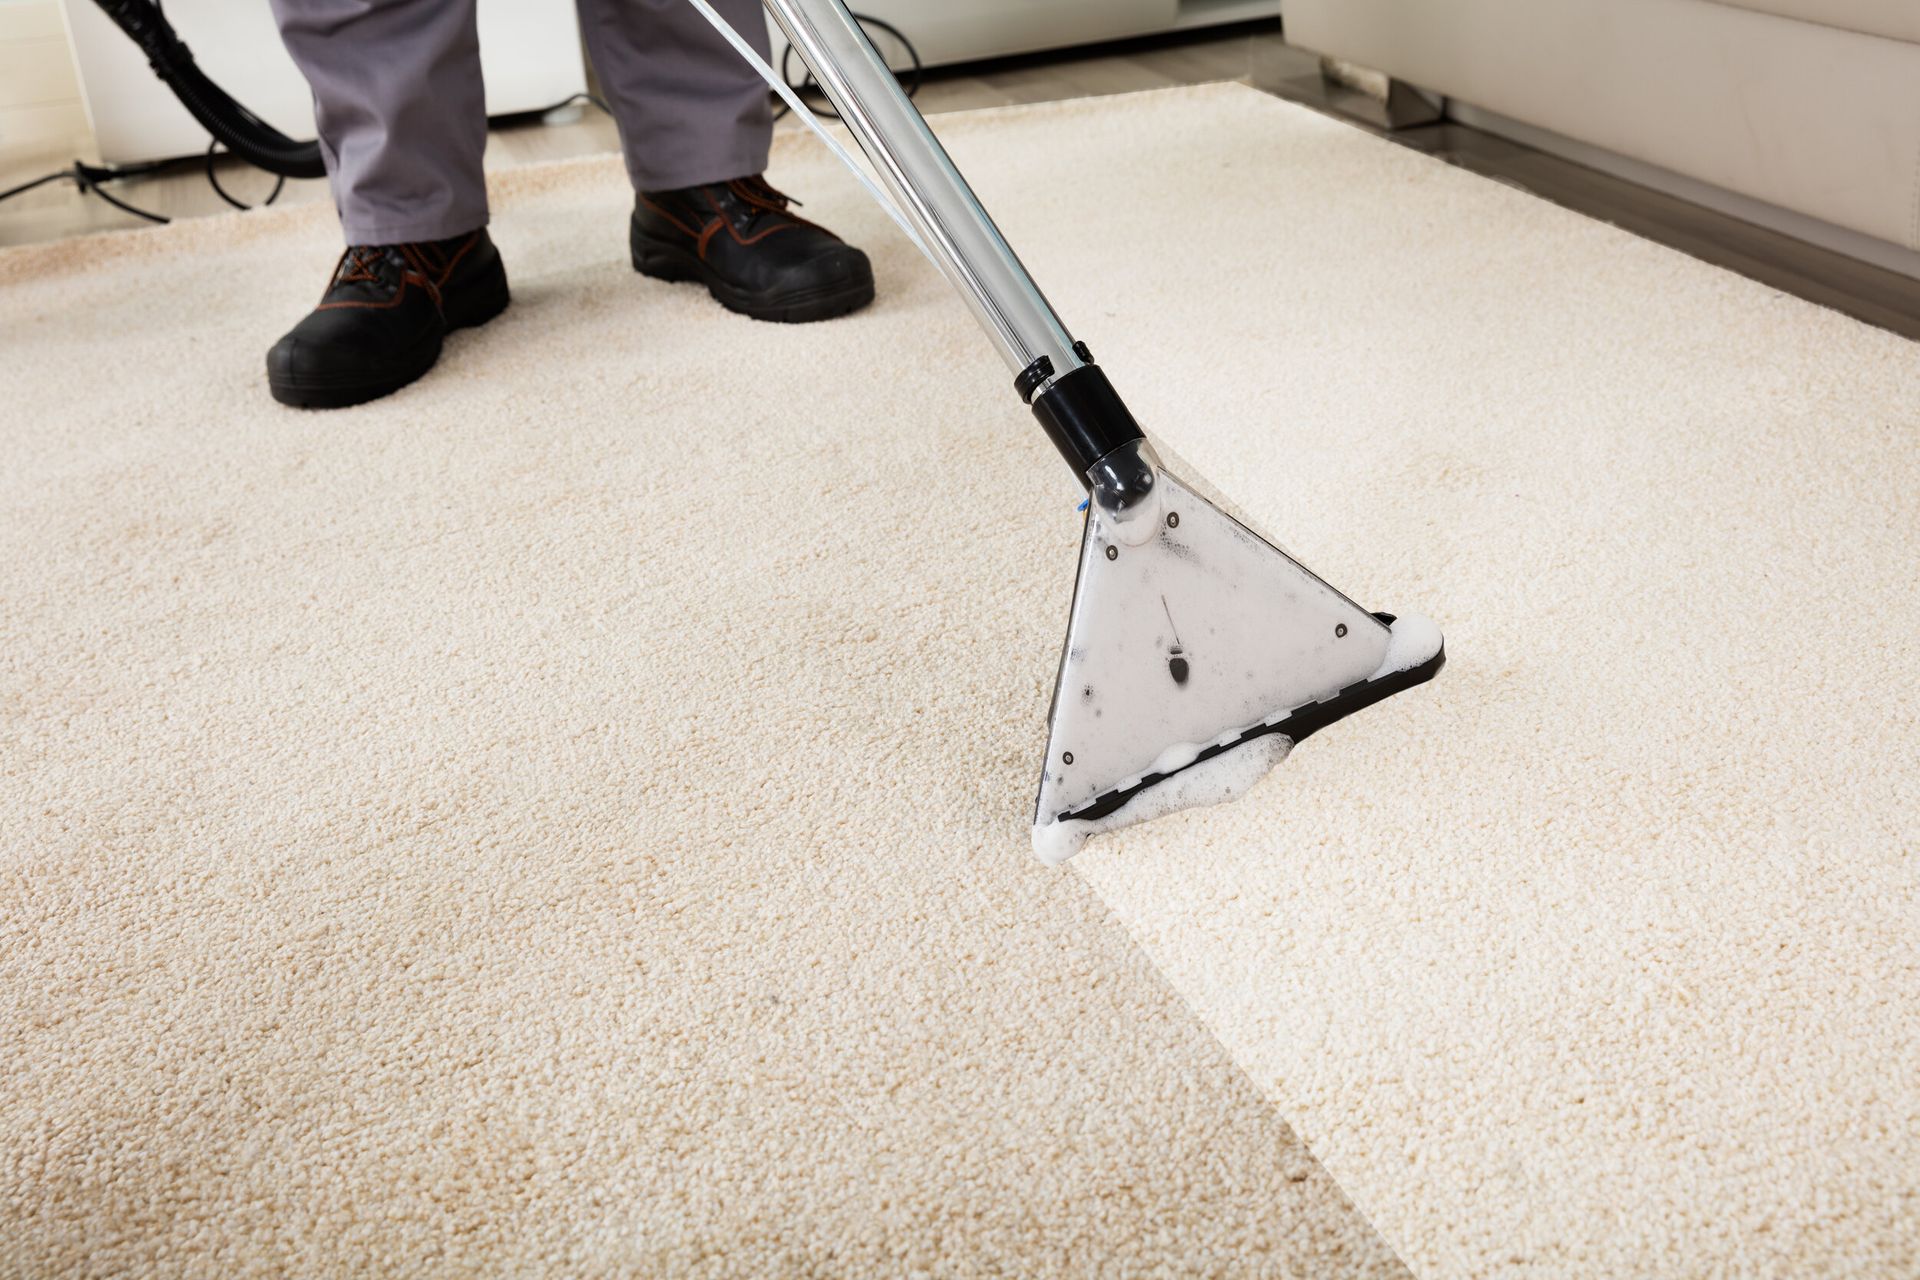 A person is cleaning a carpet with a vacuum cleaner